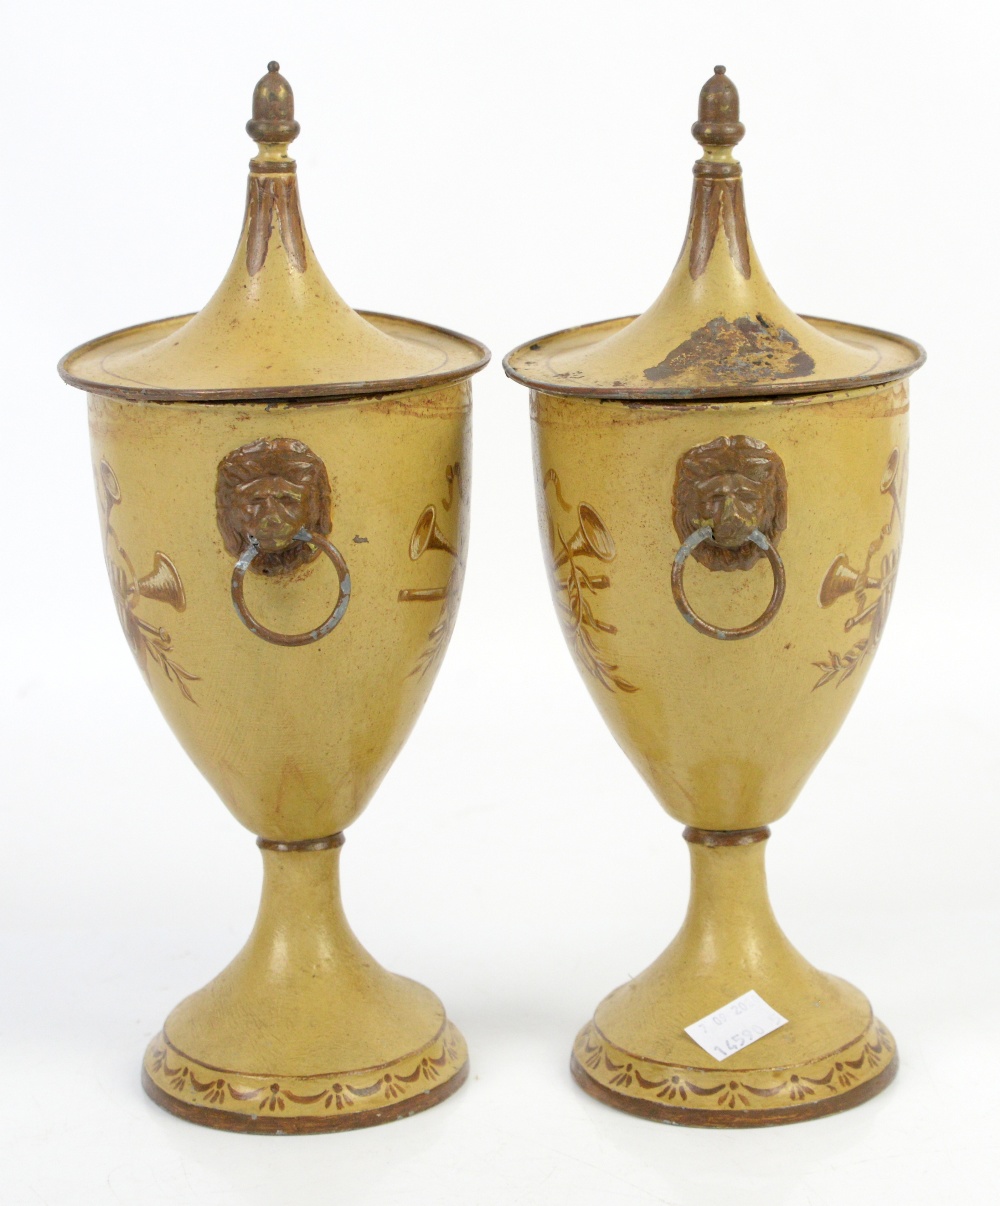 AMENDED DESCRIPTION Pair of Toleware Chestnut Urns - Image 4 of 4